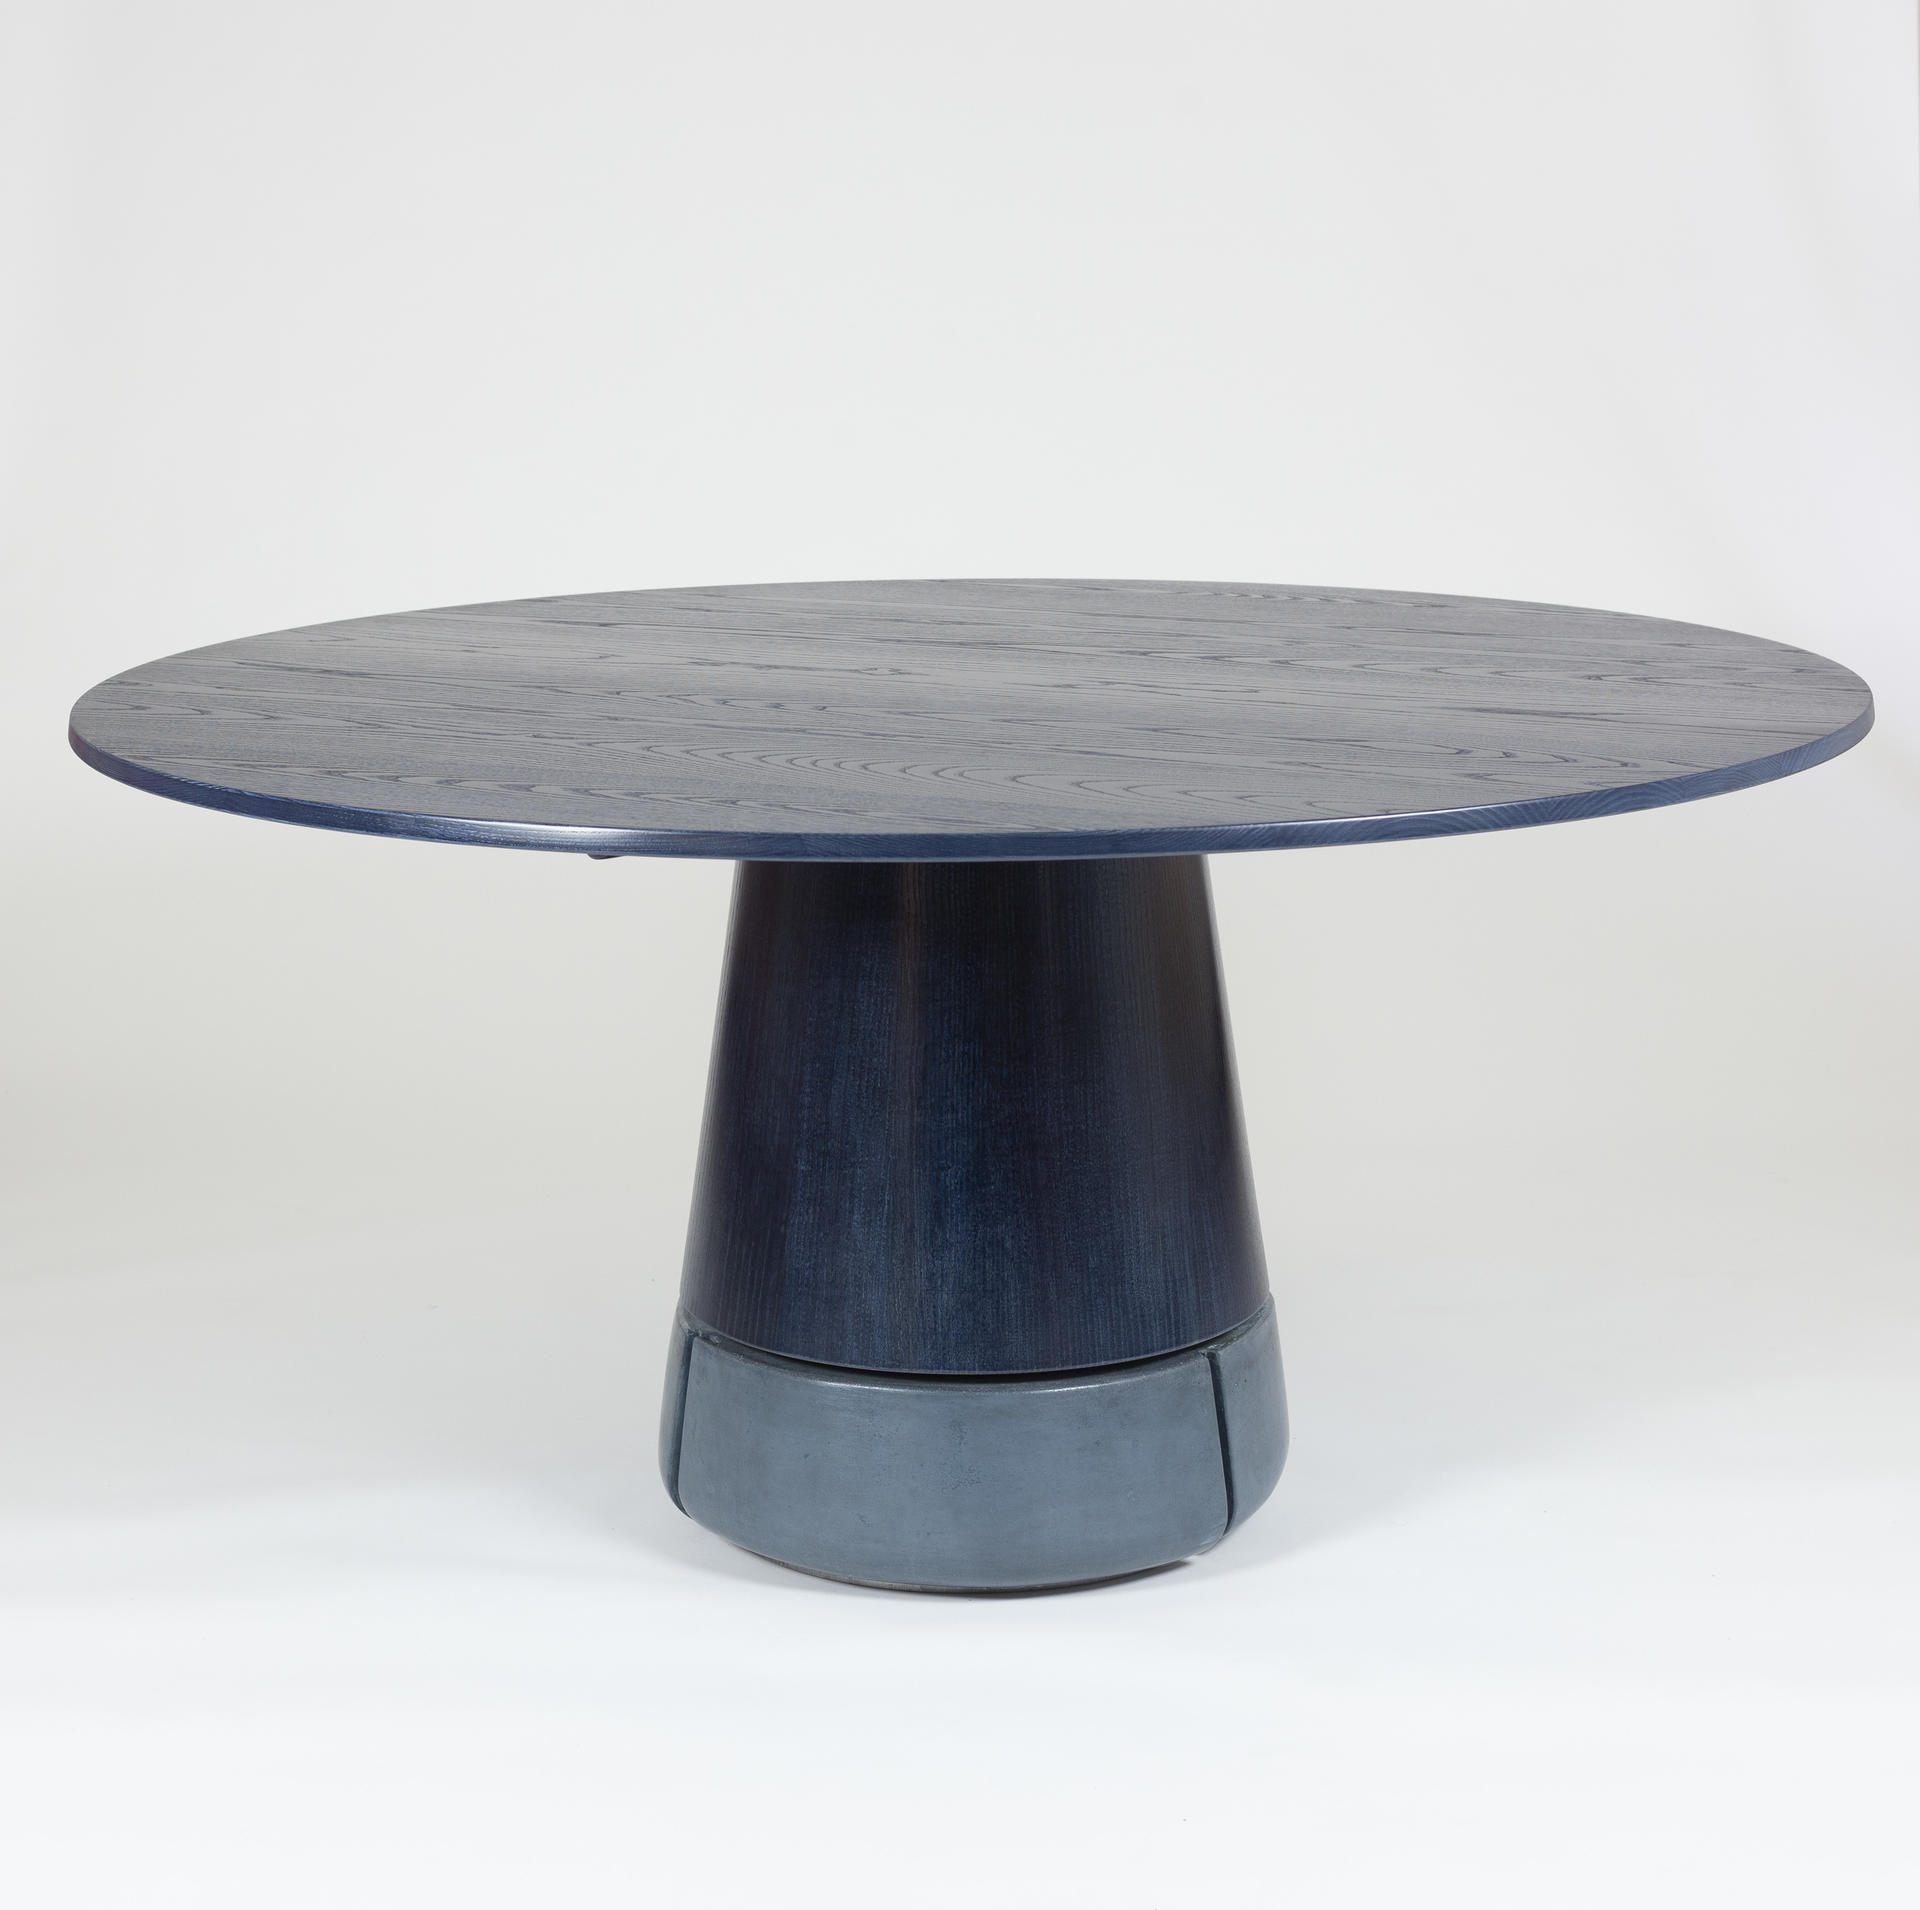 Blue round dining table with concrete base.